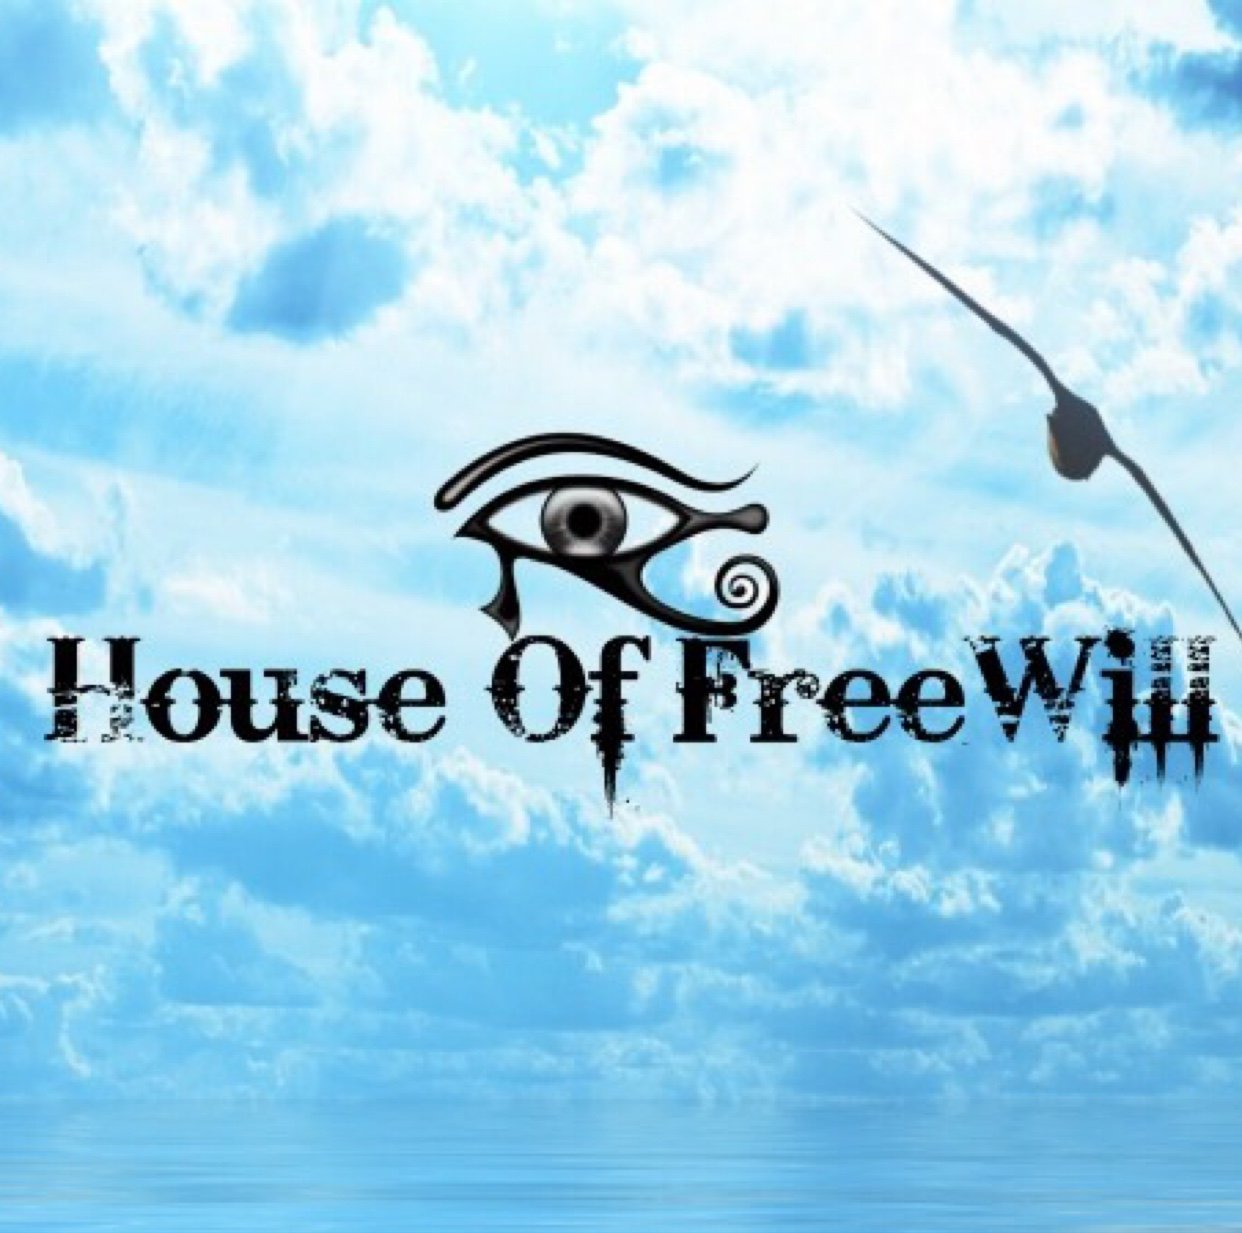 Welcome to House Of Freewill bringing you the latest news on music, politics, and entertainment. Podcast coming soon!